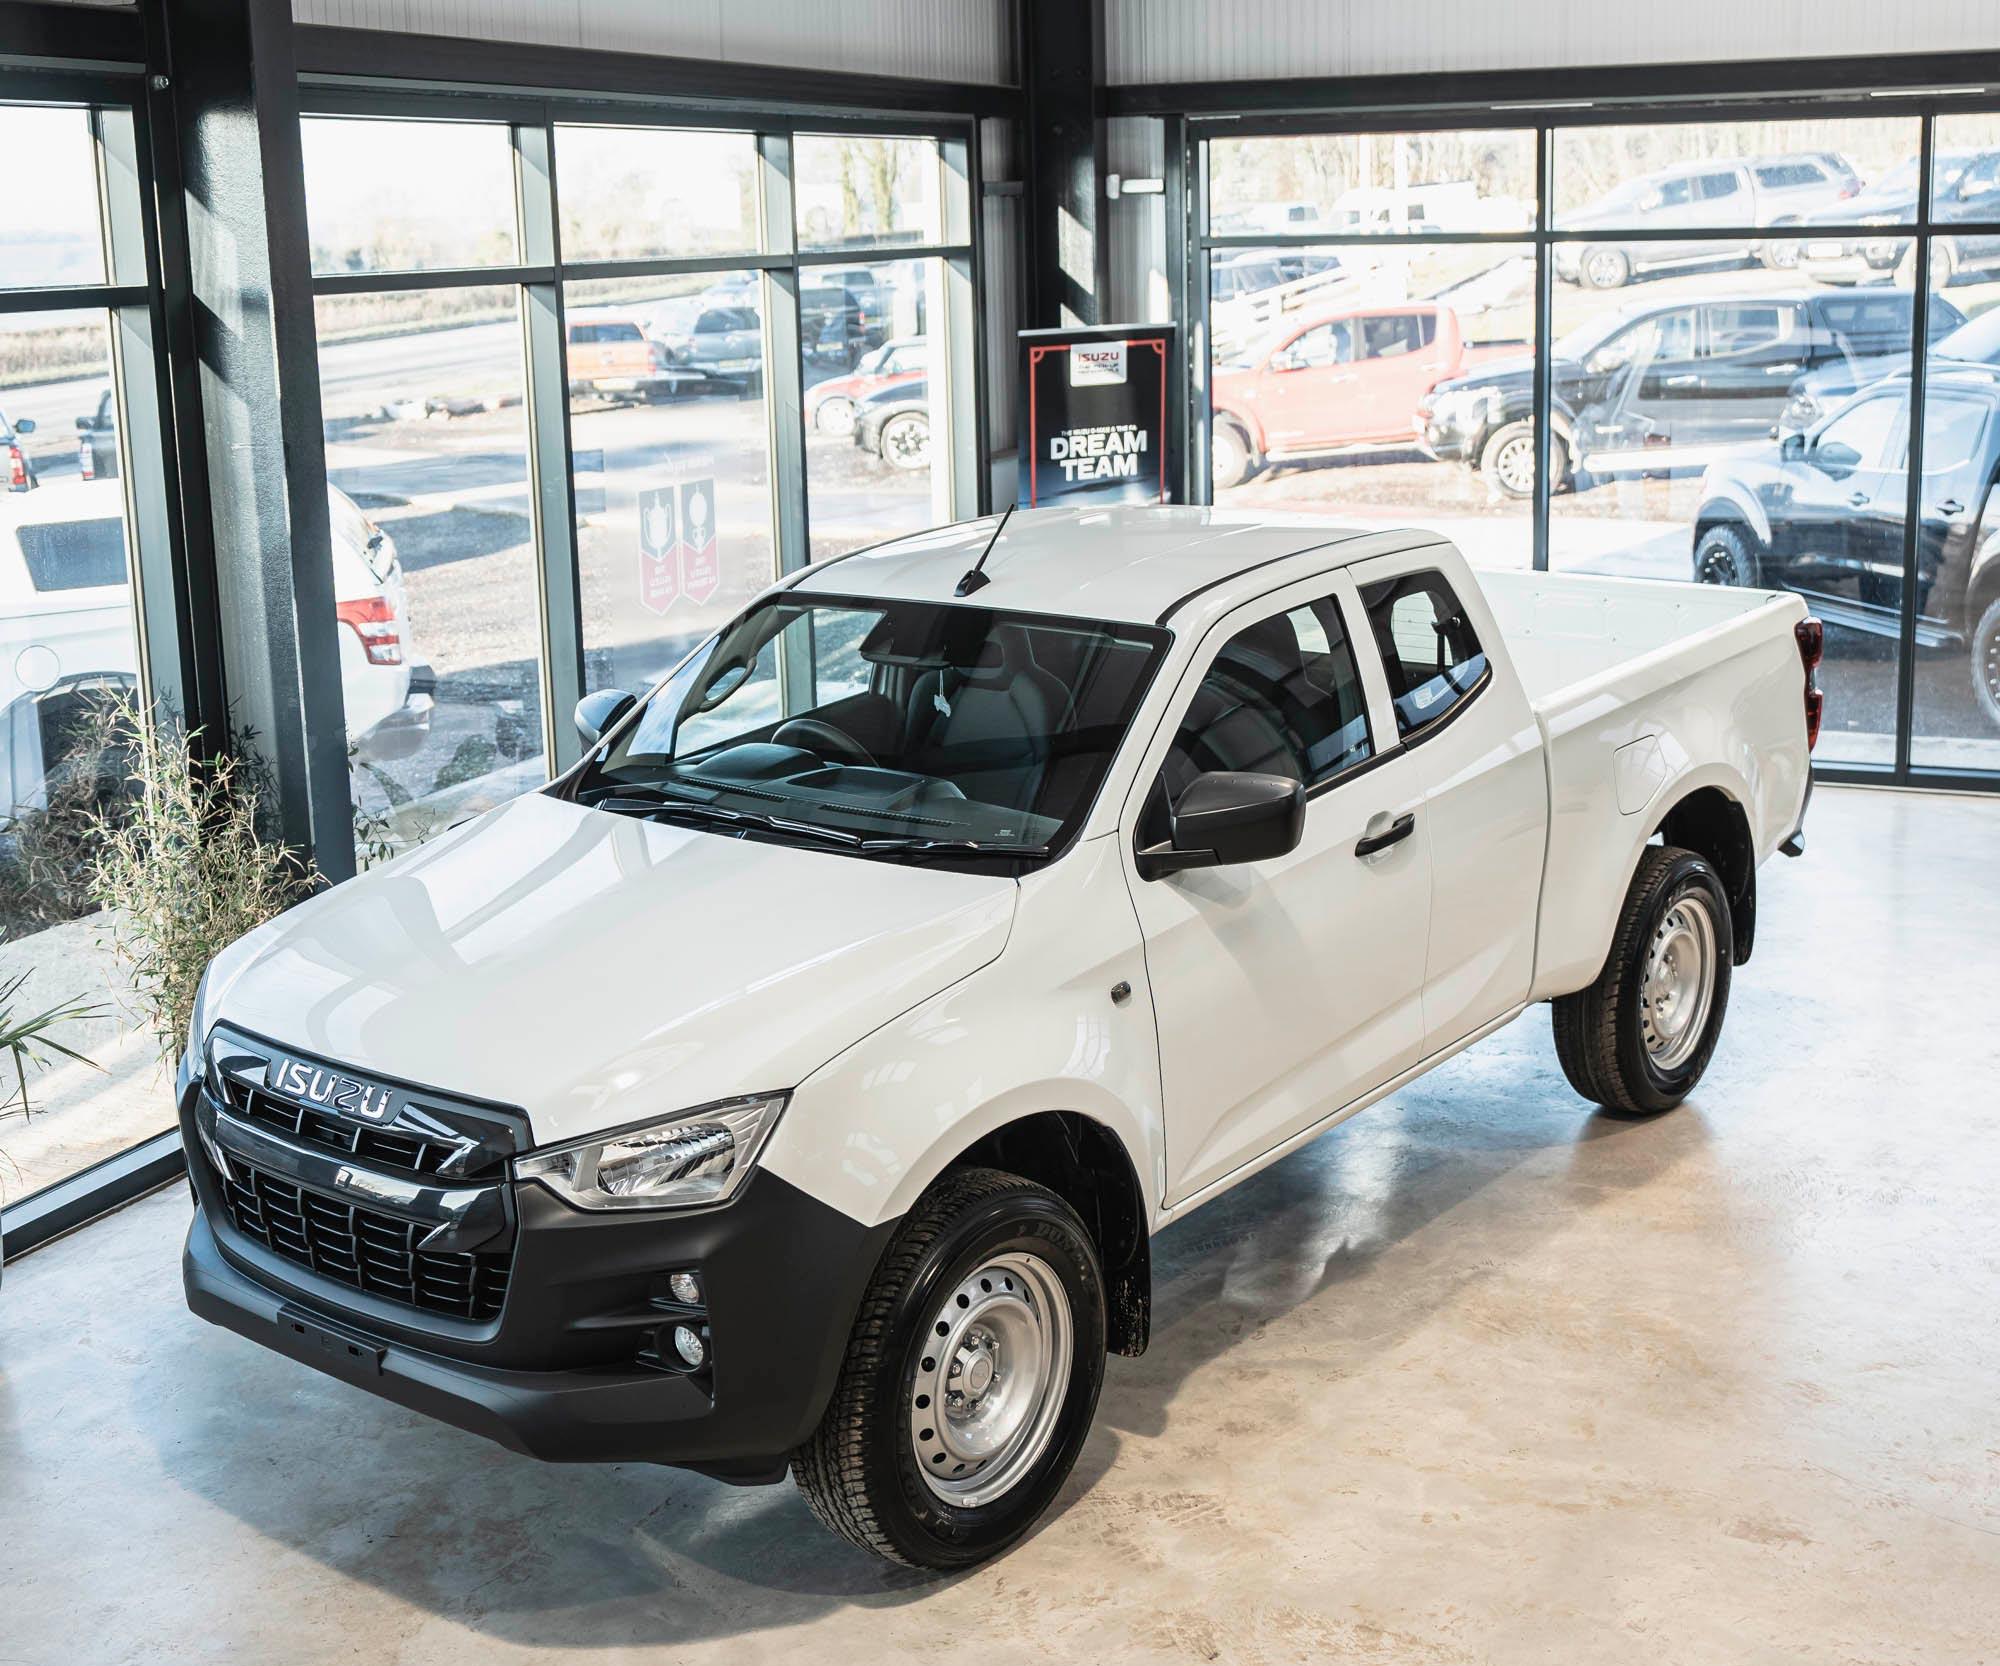 New Isuzu D-Max at Otter Vale Motor Services